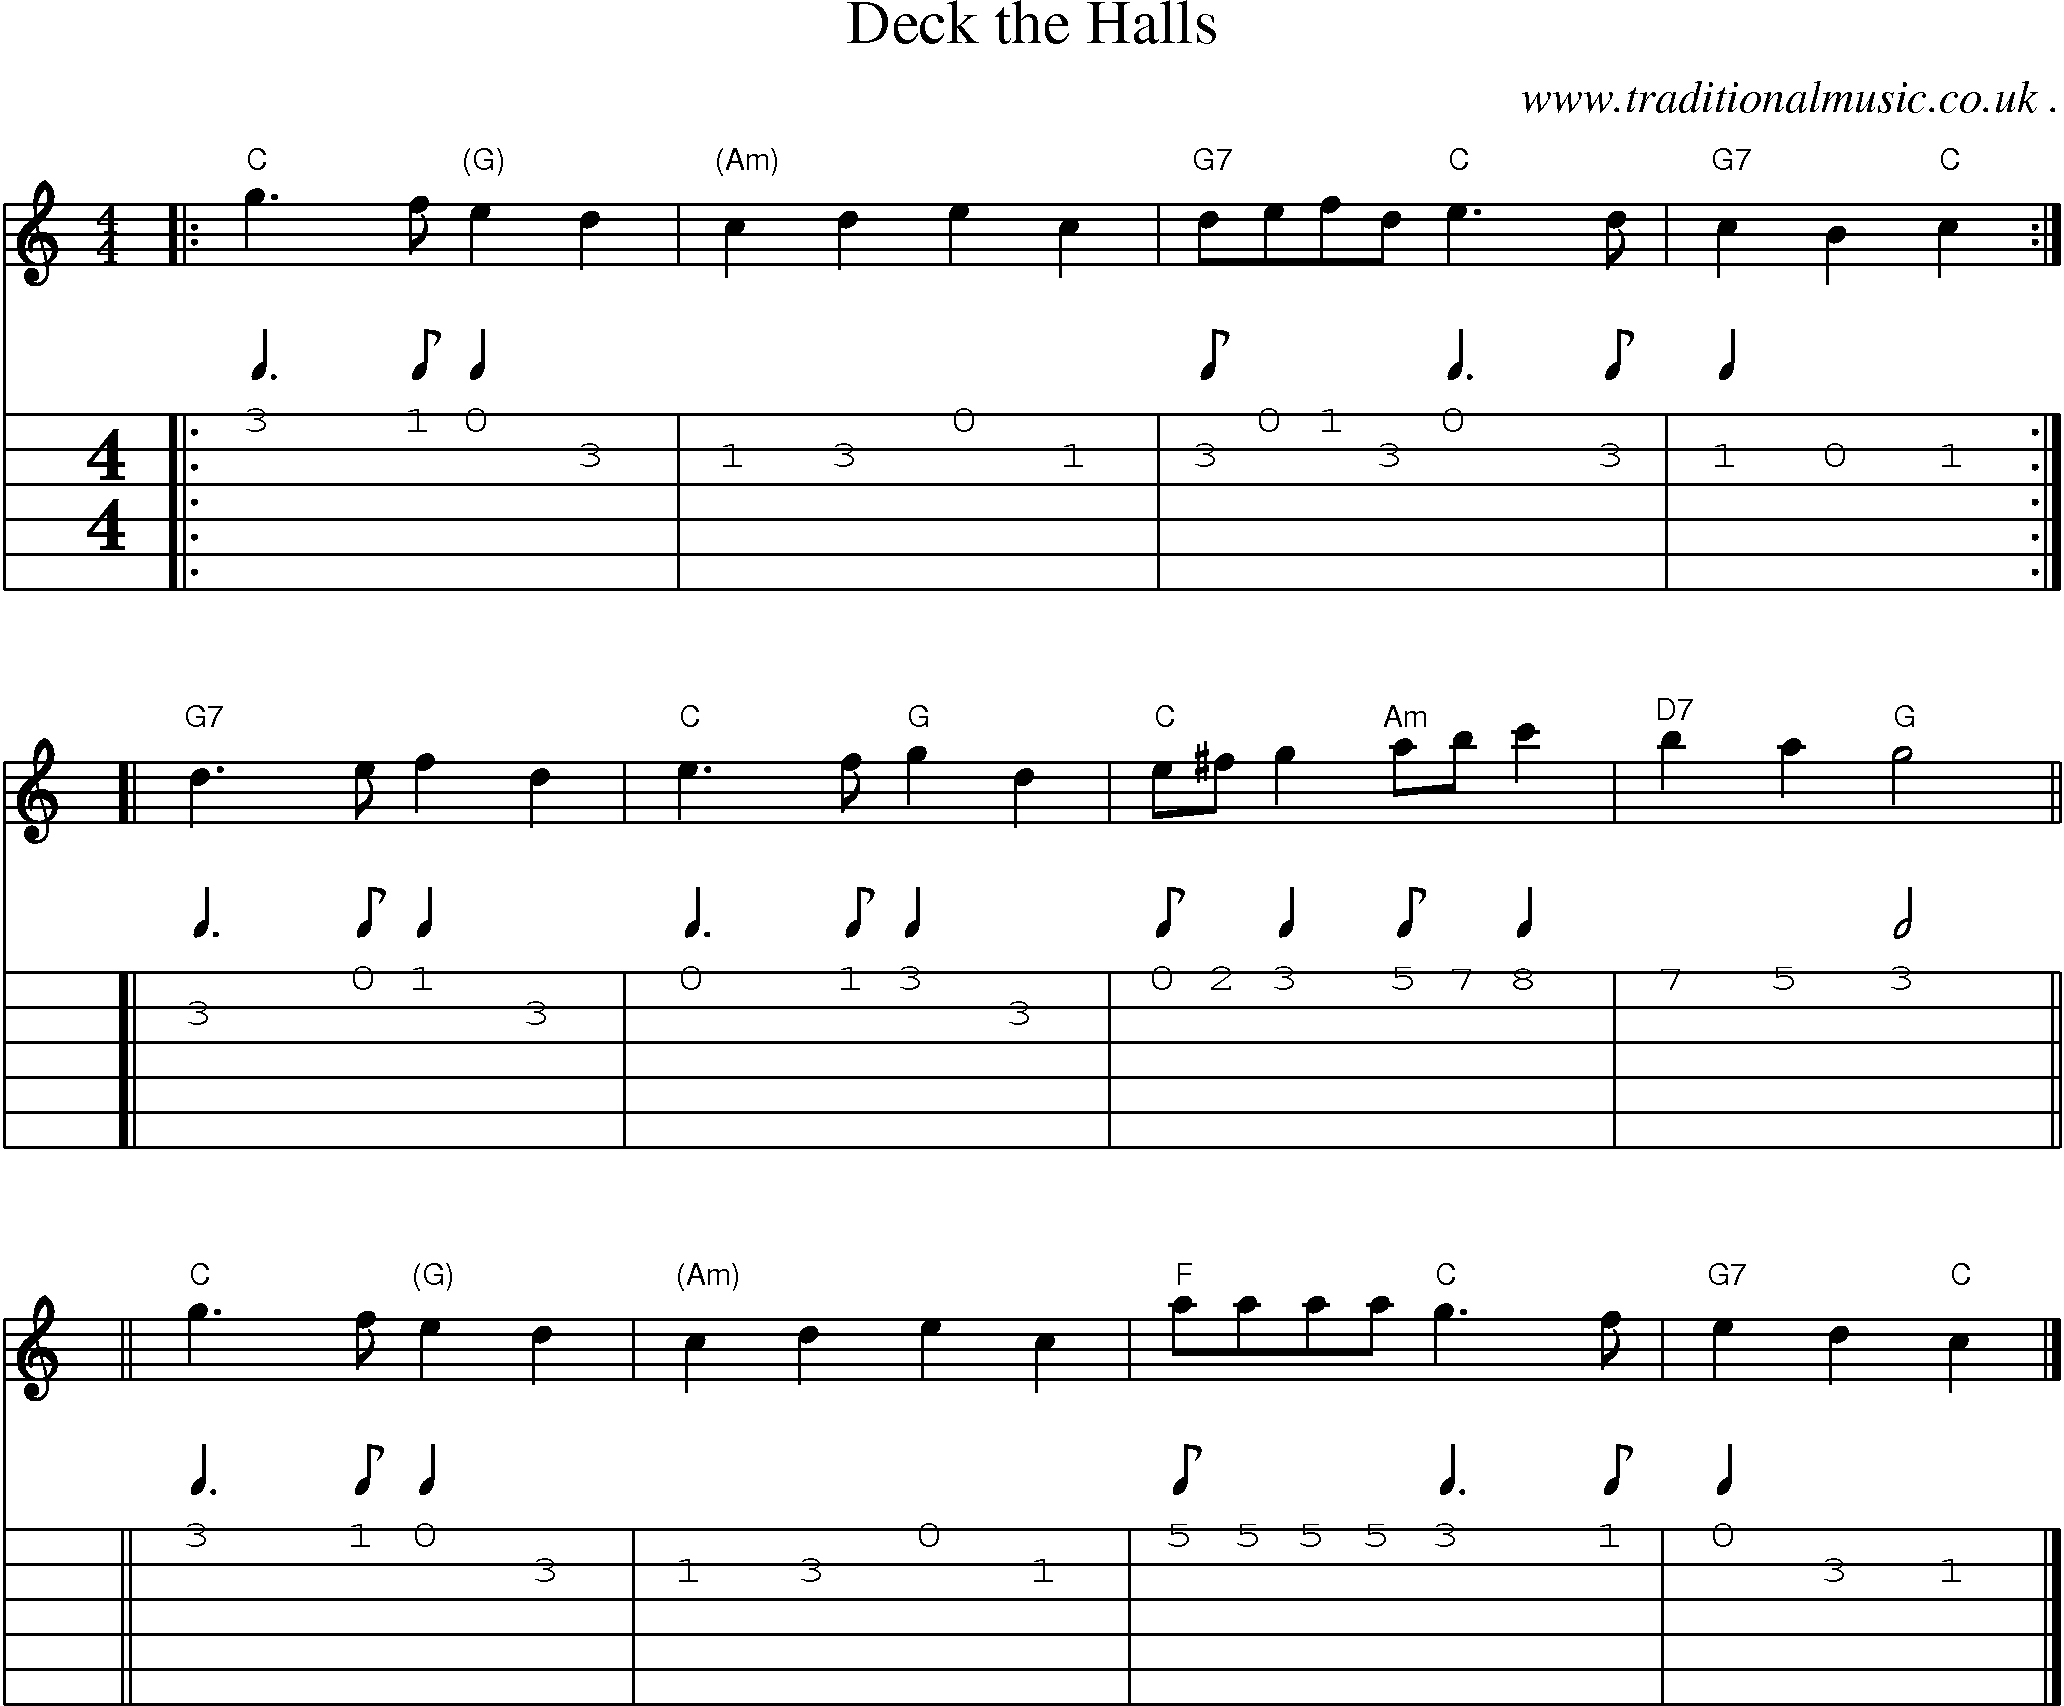 Sheet-music  score, Chords and Guitar Tabs for Deck The Halls